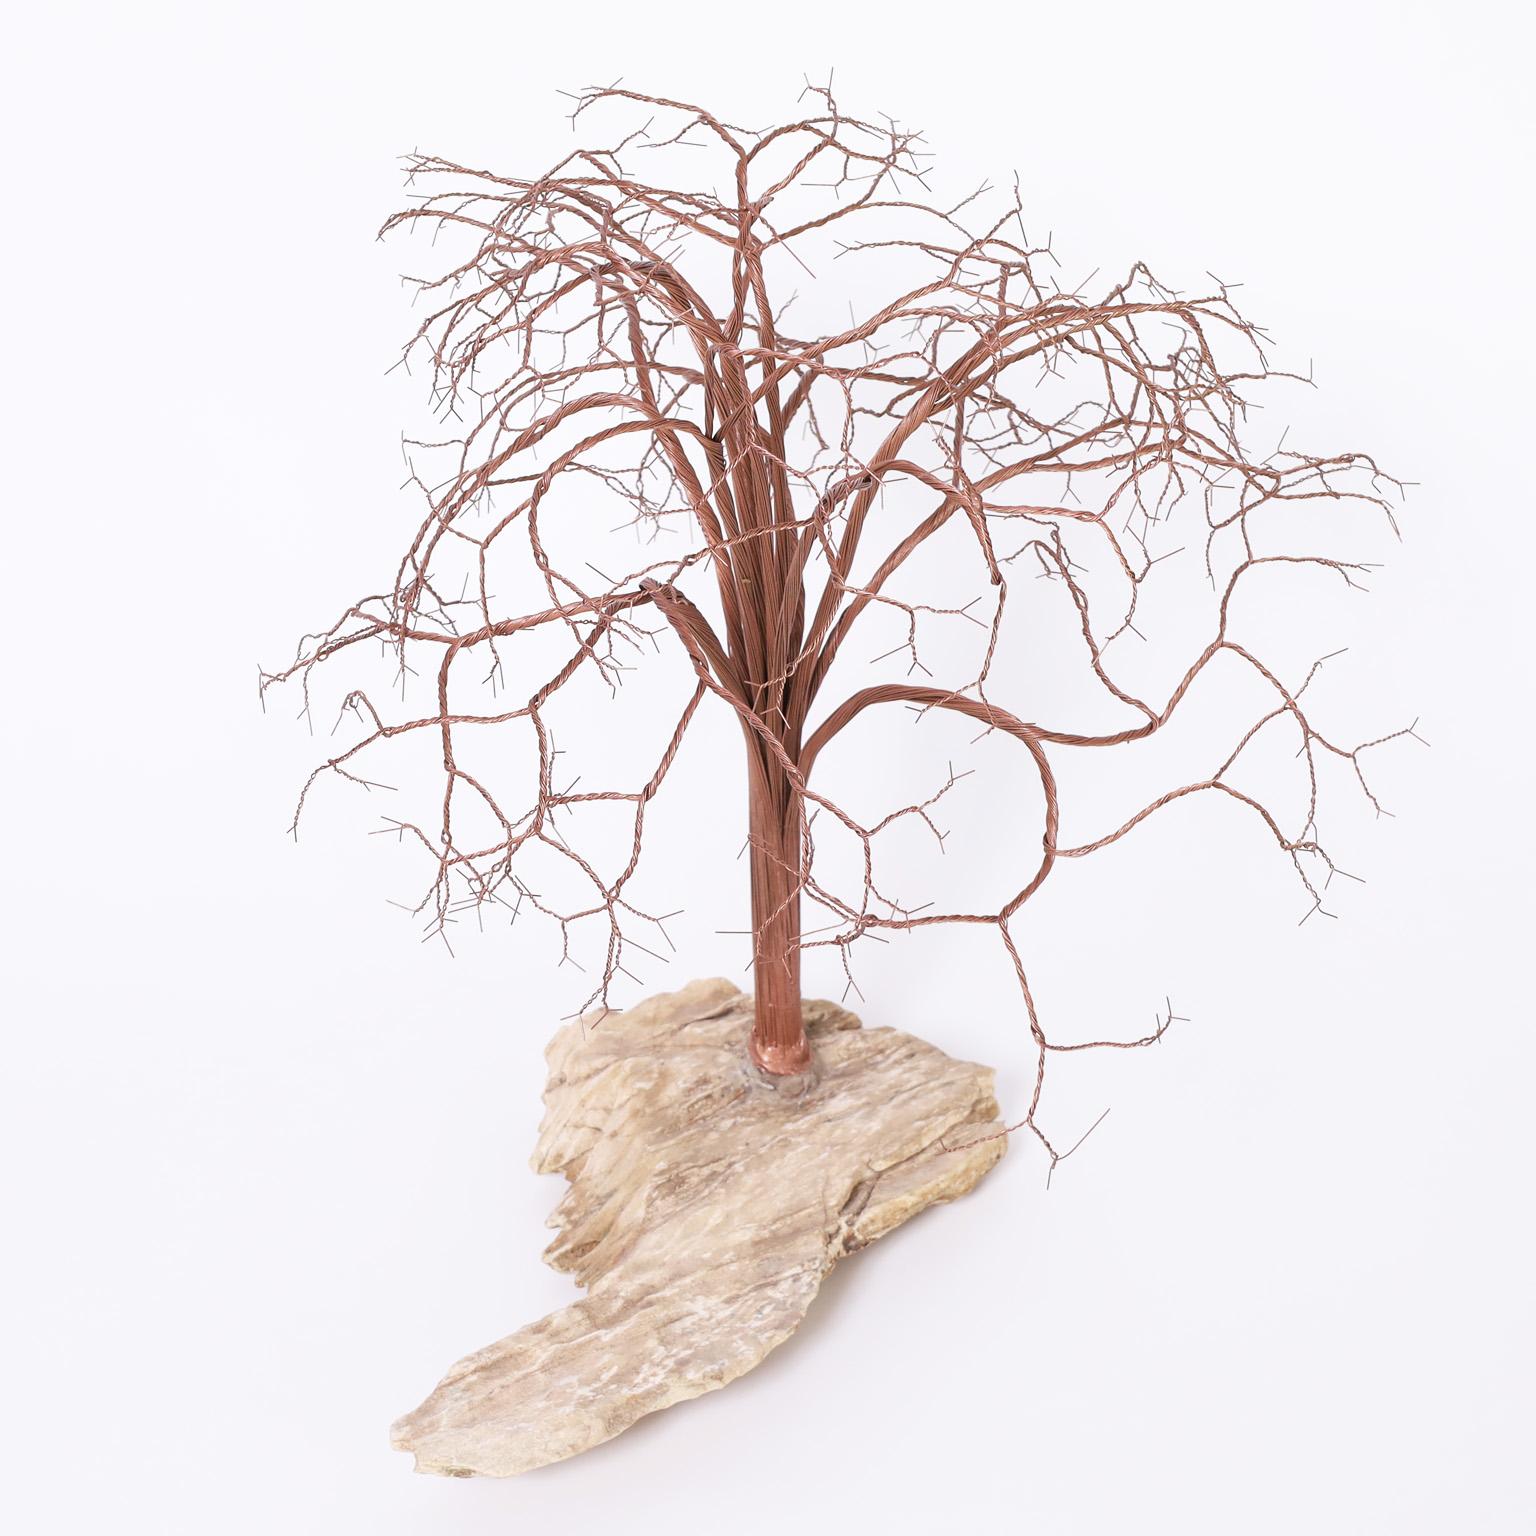 Lofty mid century tree sculpture crafted in copper twisted into form and mounted on an organic stone base.